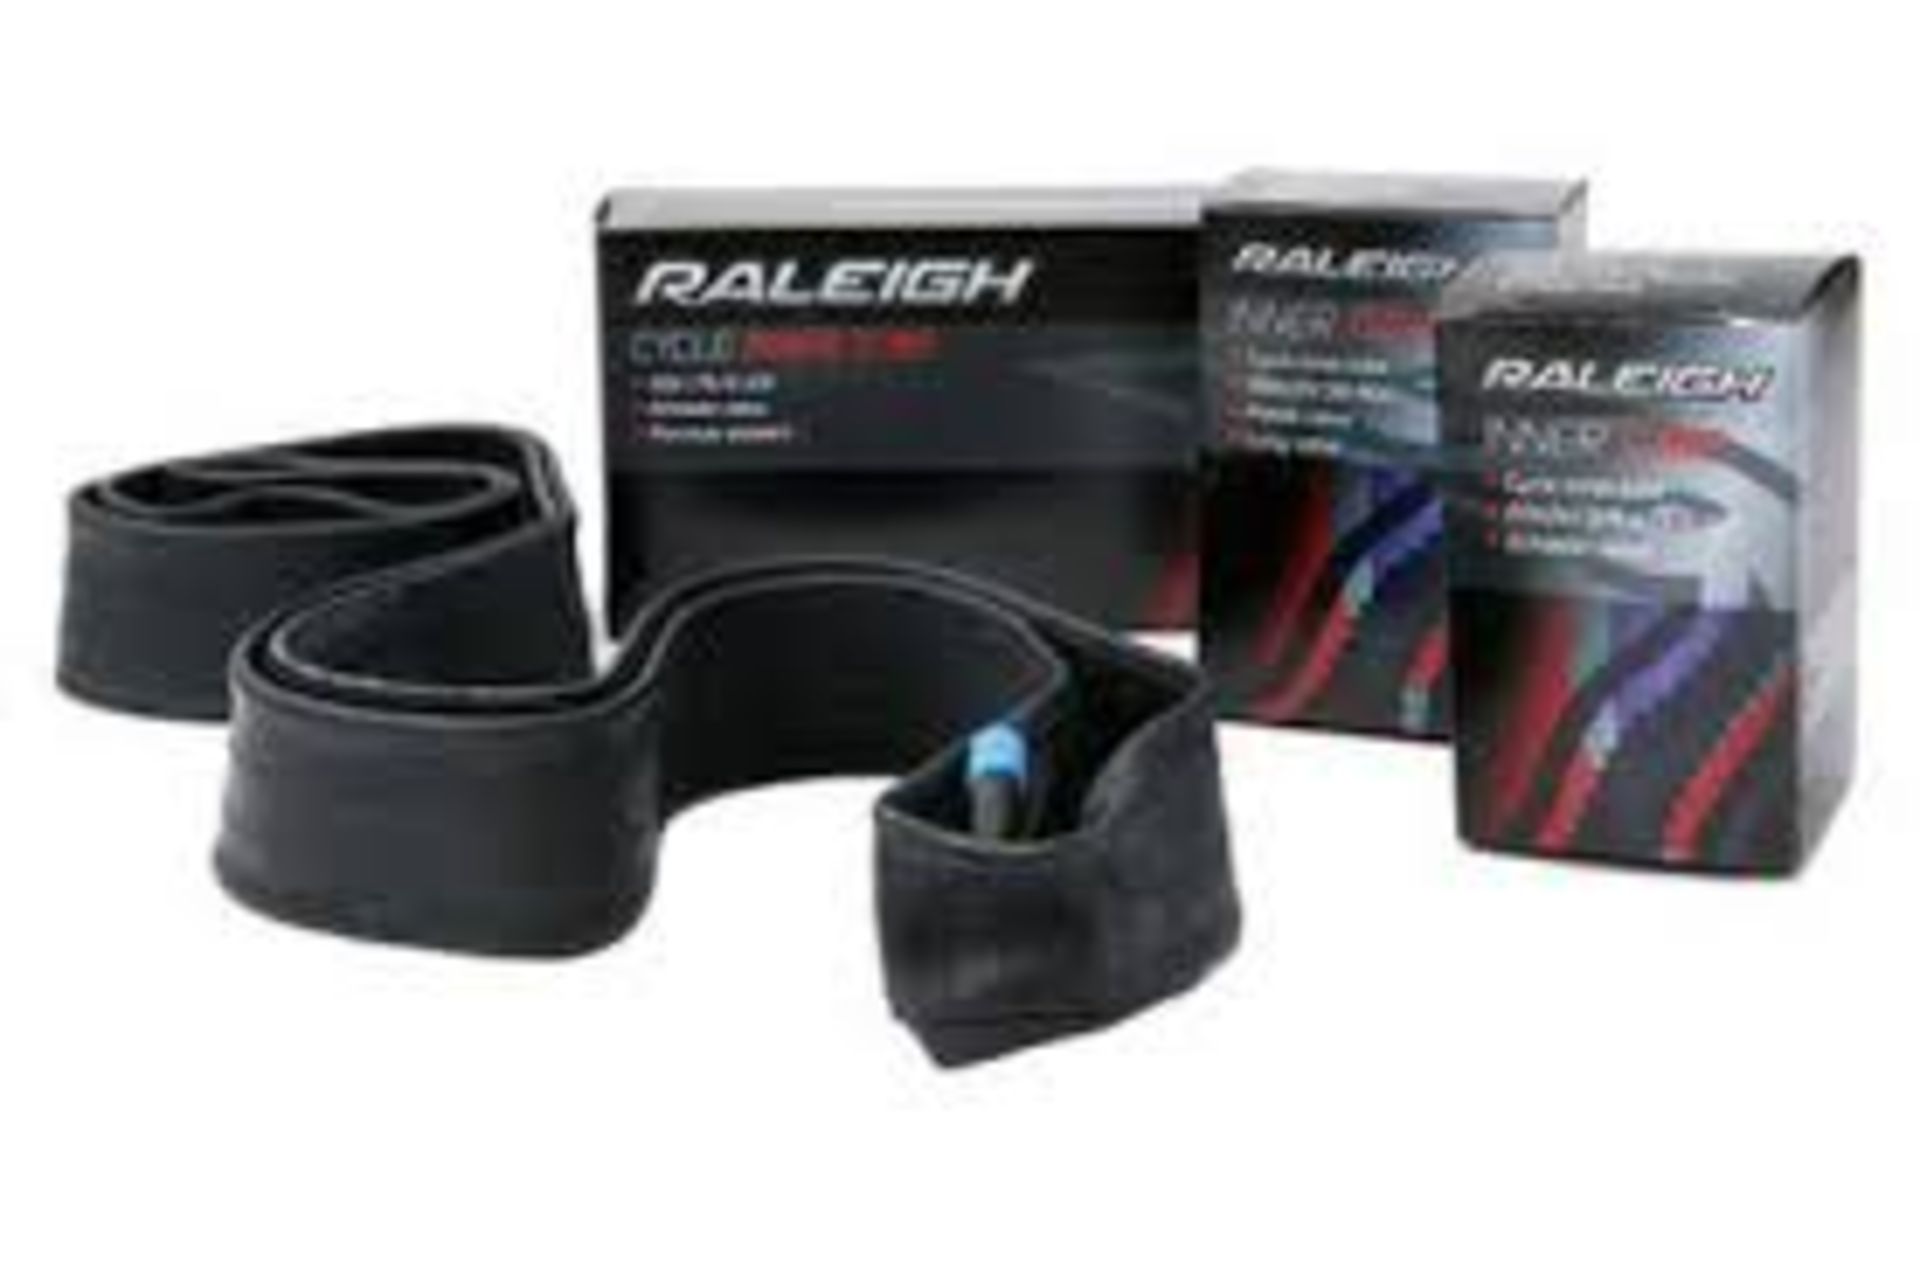 V *TRADE QTY* Brand New Two Raleigh Inner tubes 26 x 1.50-2.125 for adult mountain bike X 4 Bid